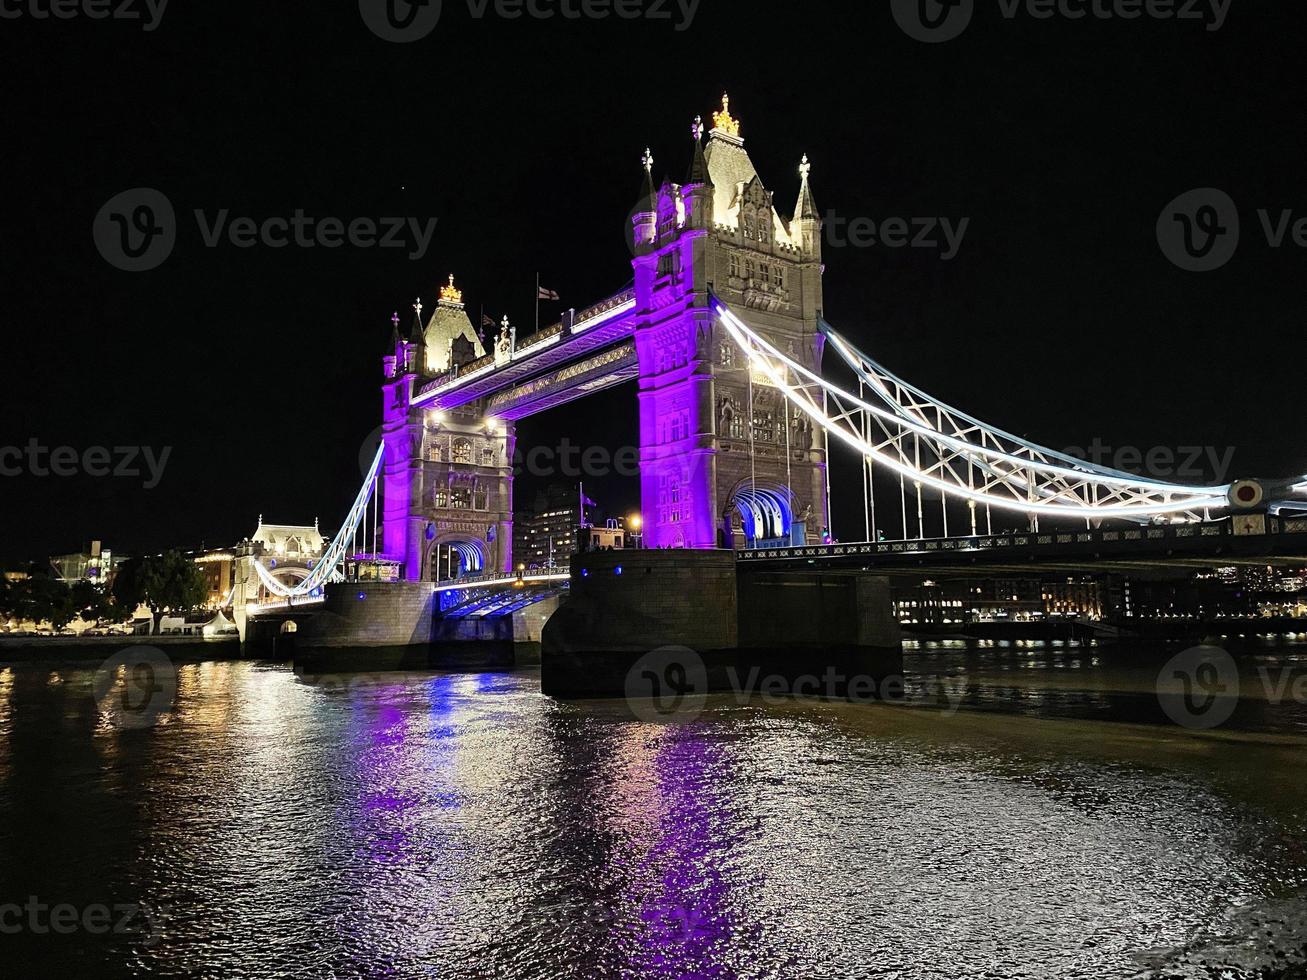 A view of Tower Bridge in London at night lit up in purple photo